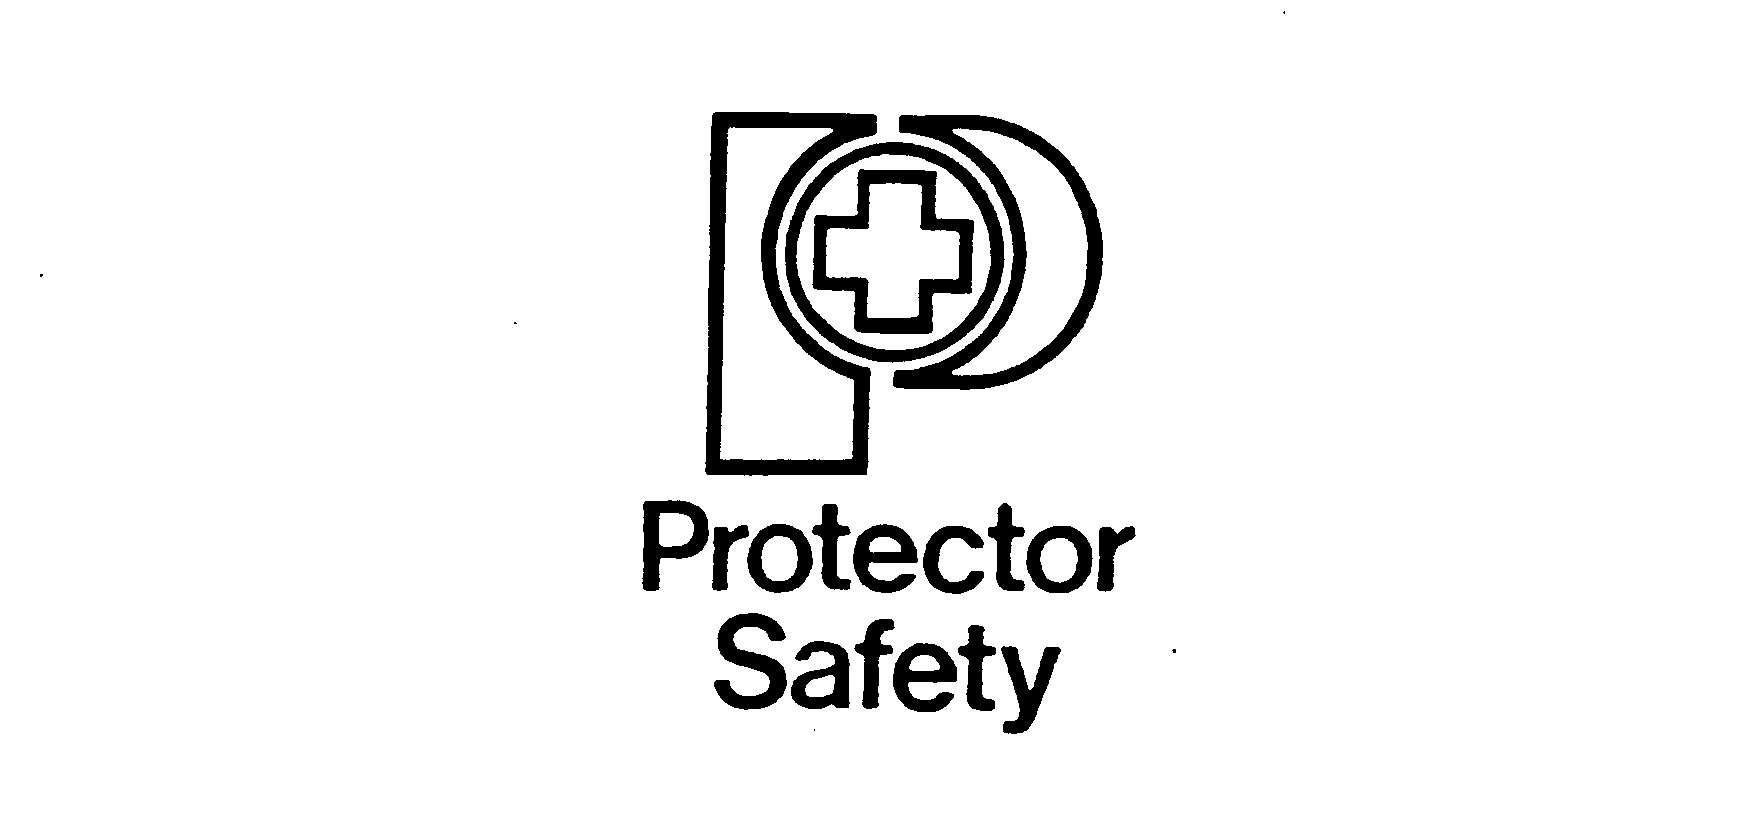  P PROTECTOR SAFETY